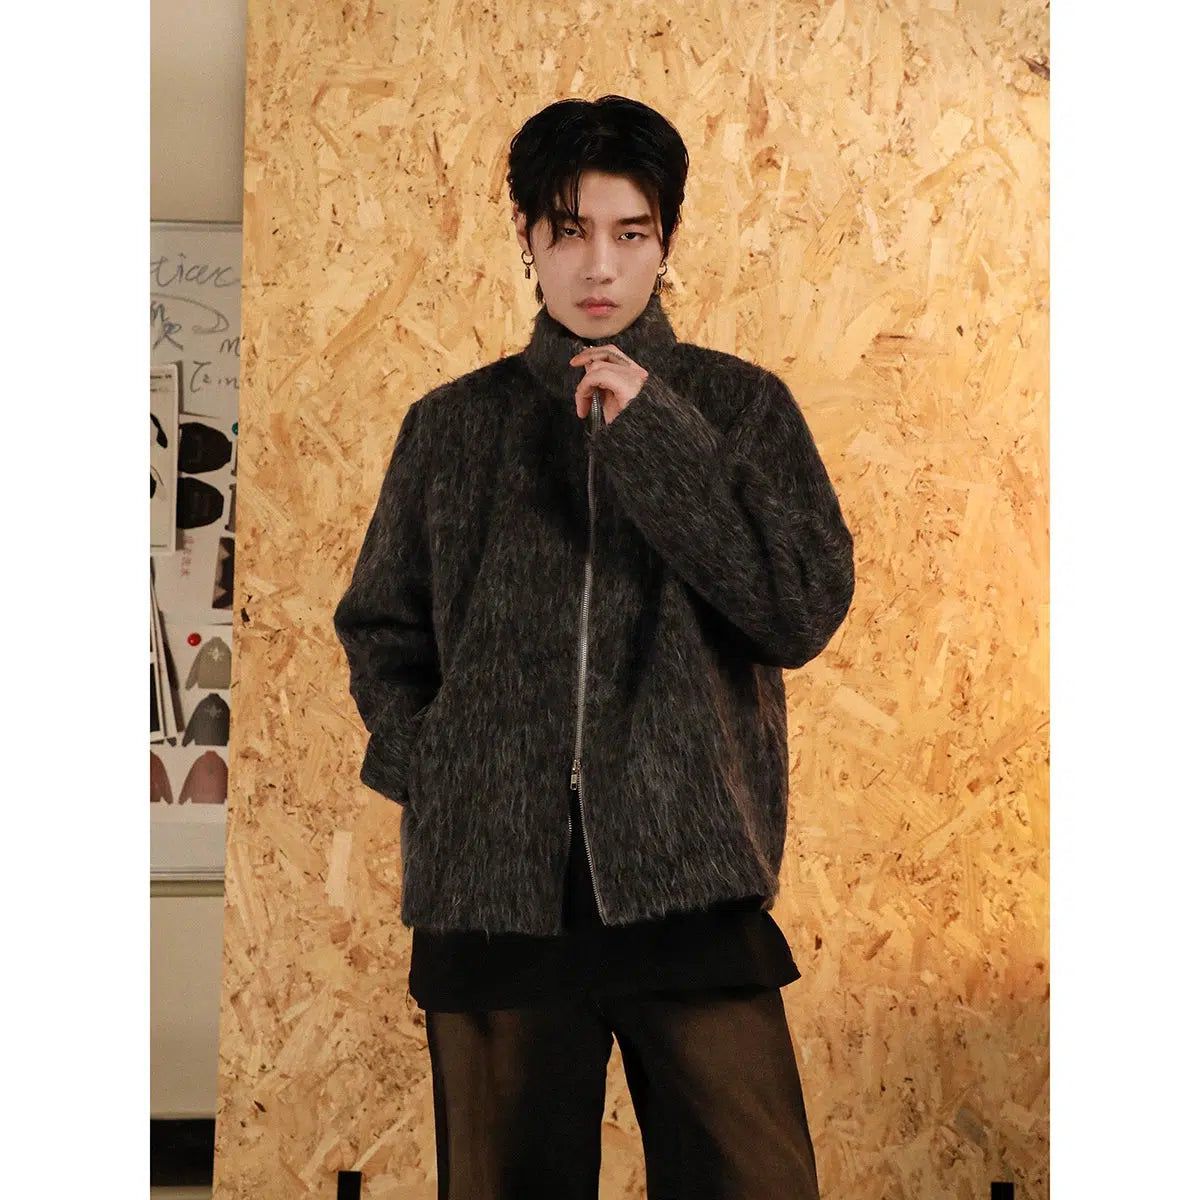 Hazy Stand Collar Fur Jacket Korean Street Fashion Jacket By Mr Nearly Shop Online at OH Vault